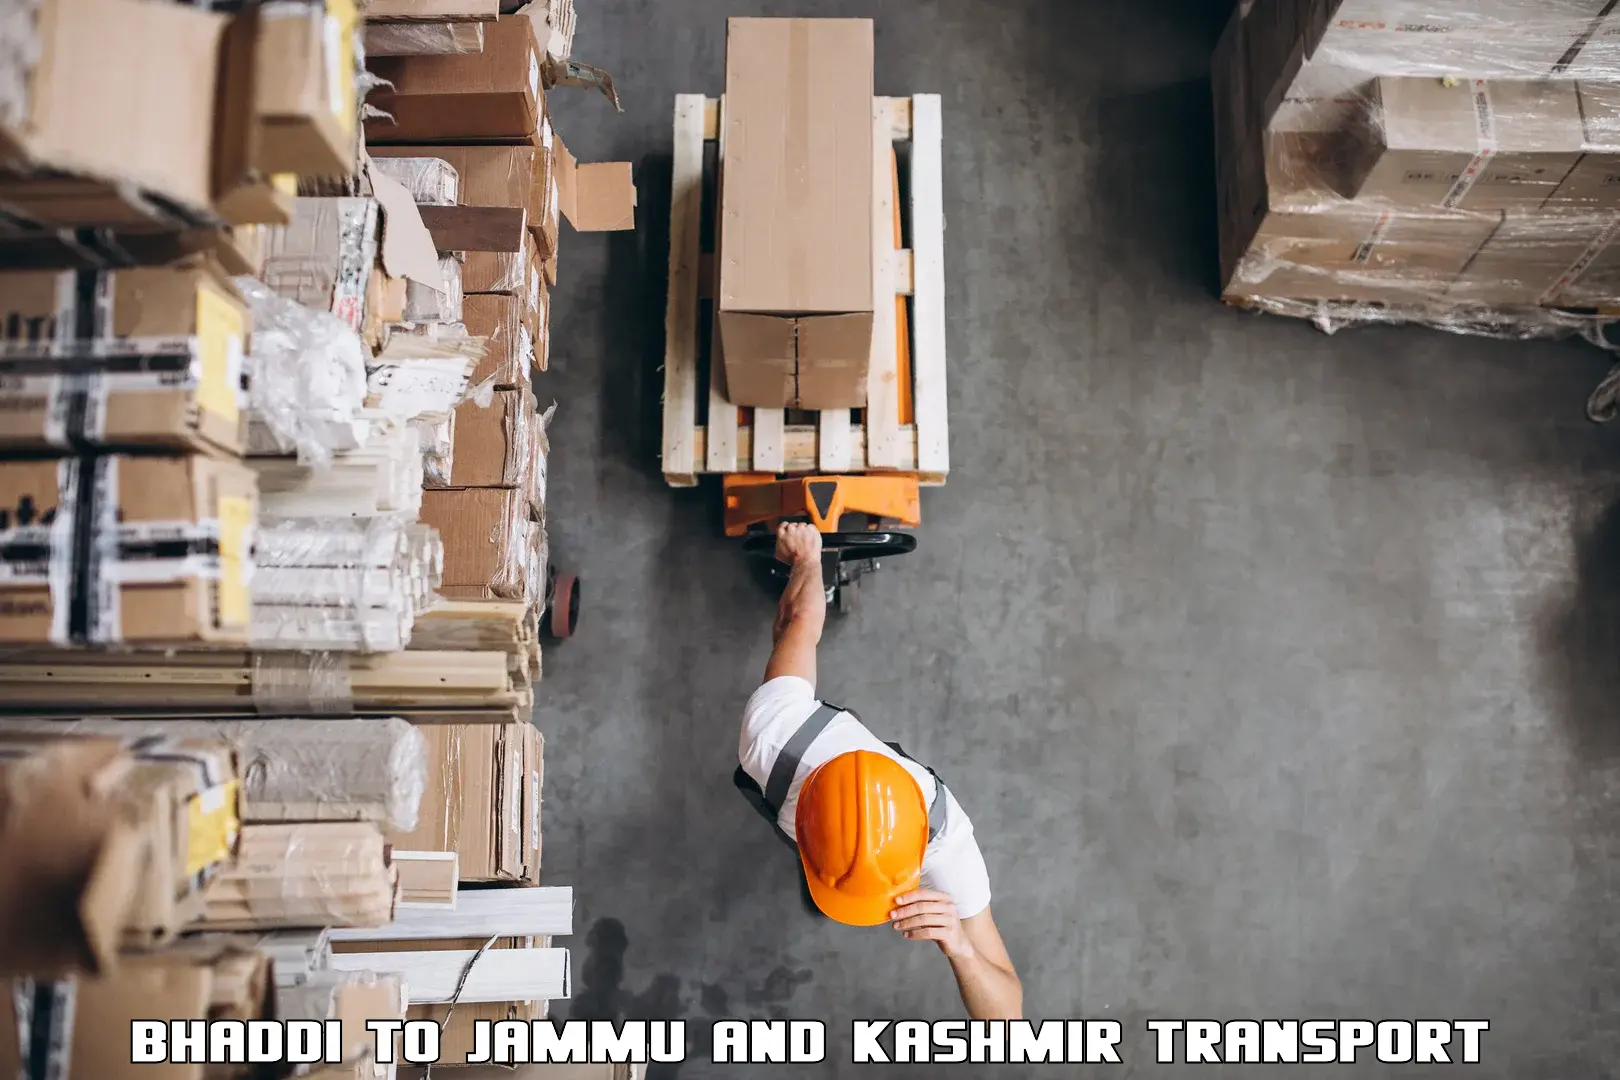 Delivery service Bhaddi to Jammu and Kashmir